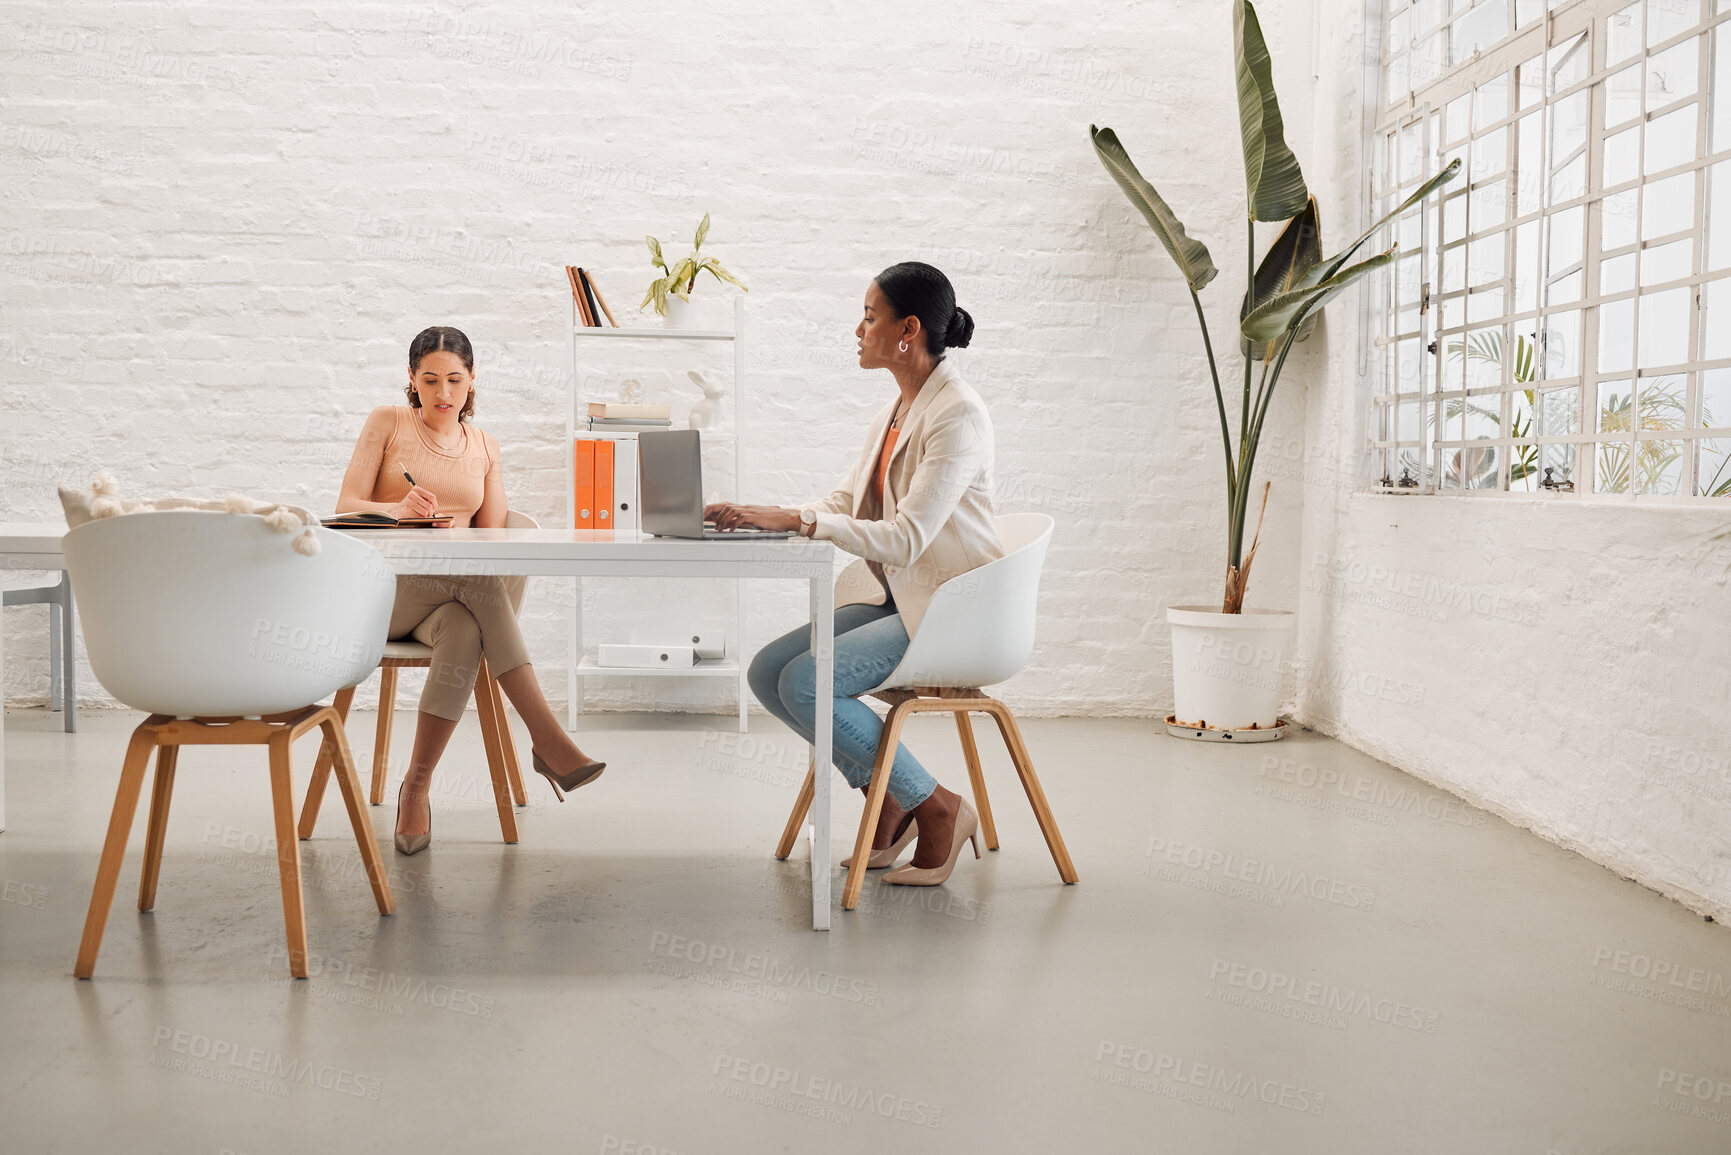 Buy stock photo Two young mixed race businesswomen having a meeting writing notes and using a laptop in a boardroom at work. Focused businesspeople talking while planning together in an office